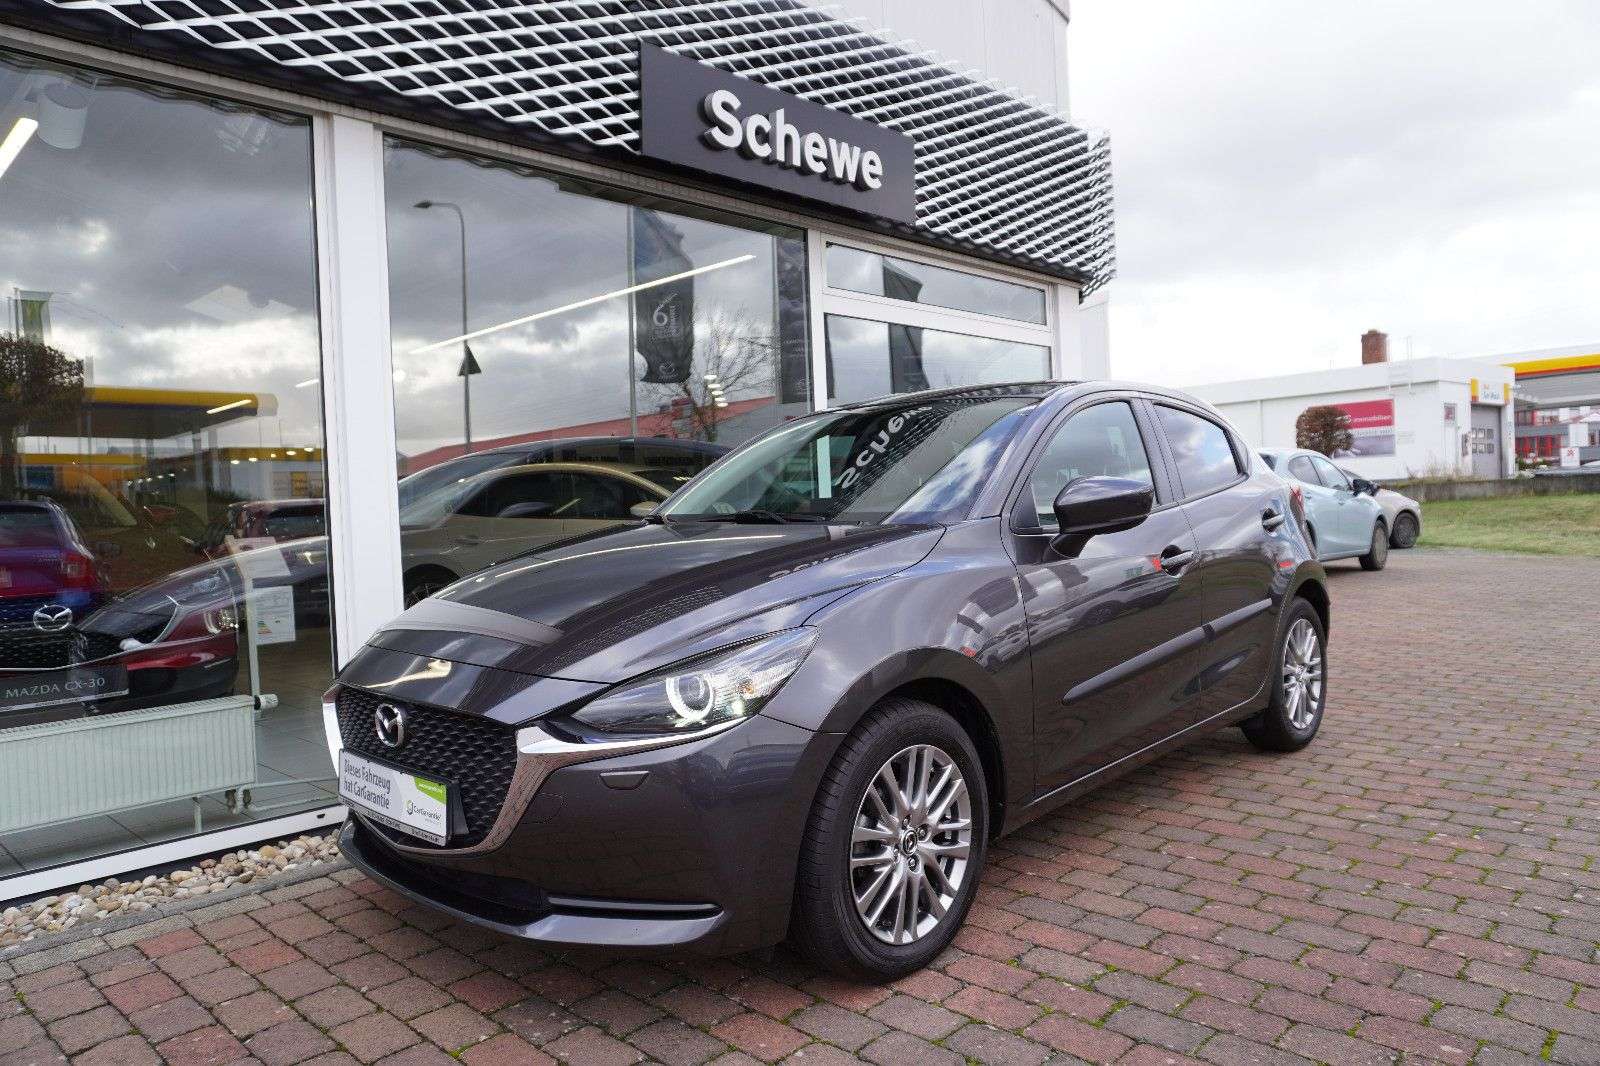 Mazda 2 Compact in Grey used in Groß-Umstadt for € 13,990.-